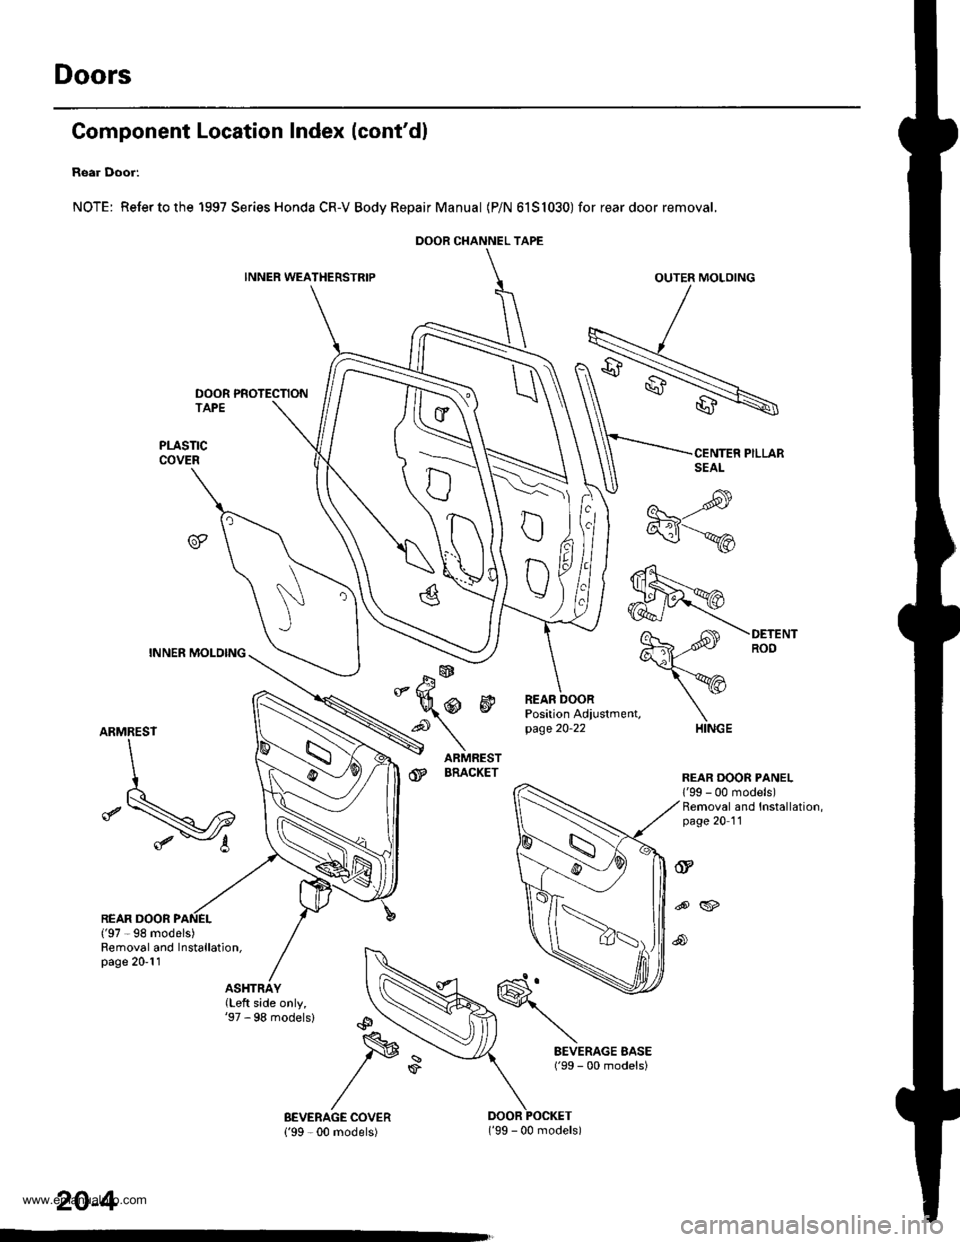 HONDA CR-V 1997 RD1-RD3 / 1.G User Guide 
Doors
Gomponent Location Index (contdl
Rear Door:
NOTE: Refertothe 1997 Series Honda CR-V Bodv RepairManual (P/N 6151030) for rear door removal.
INNER WEATHERSTRIPOUTER MOLOING
DOOR PROTECTION
ARMRE